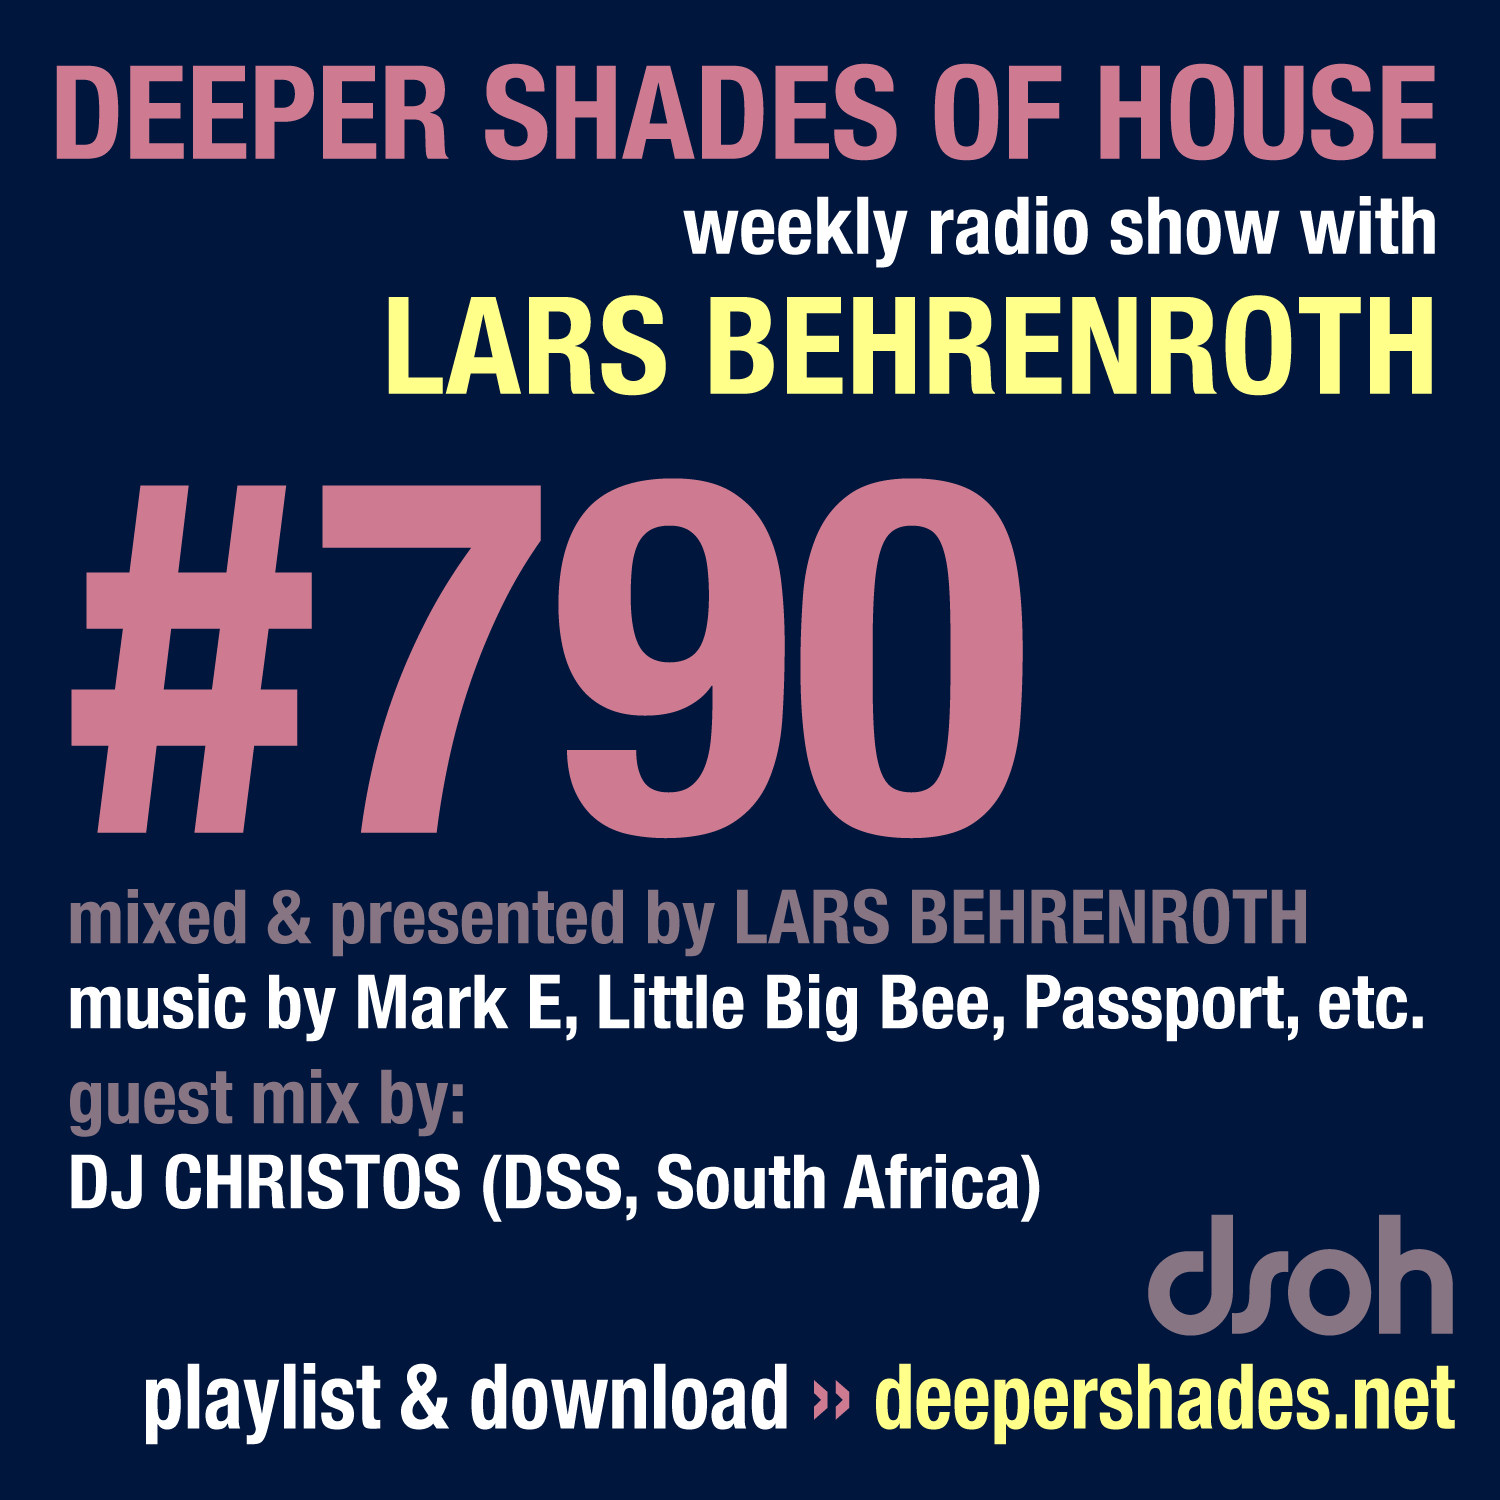 Deeper Shades Of House 790